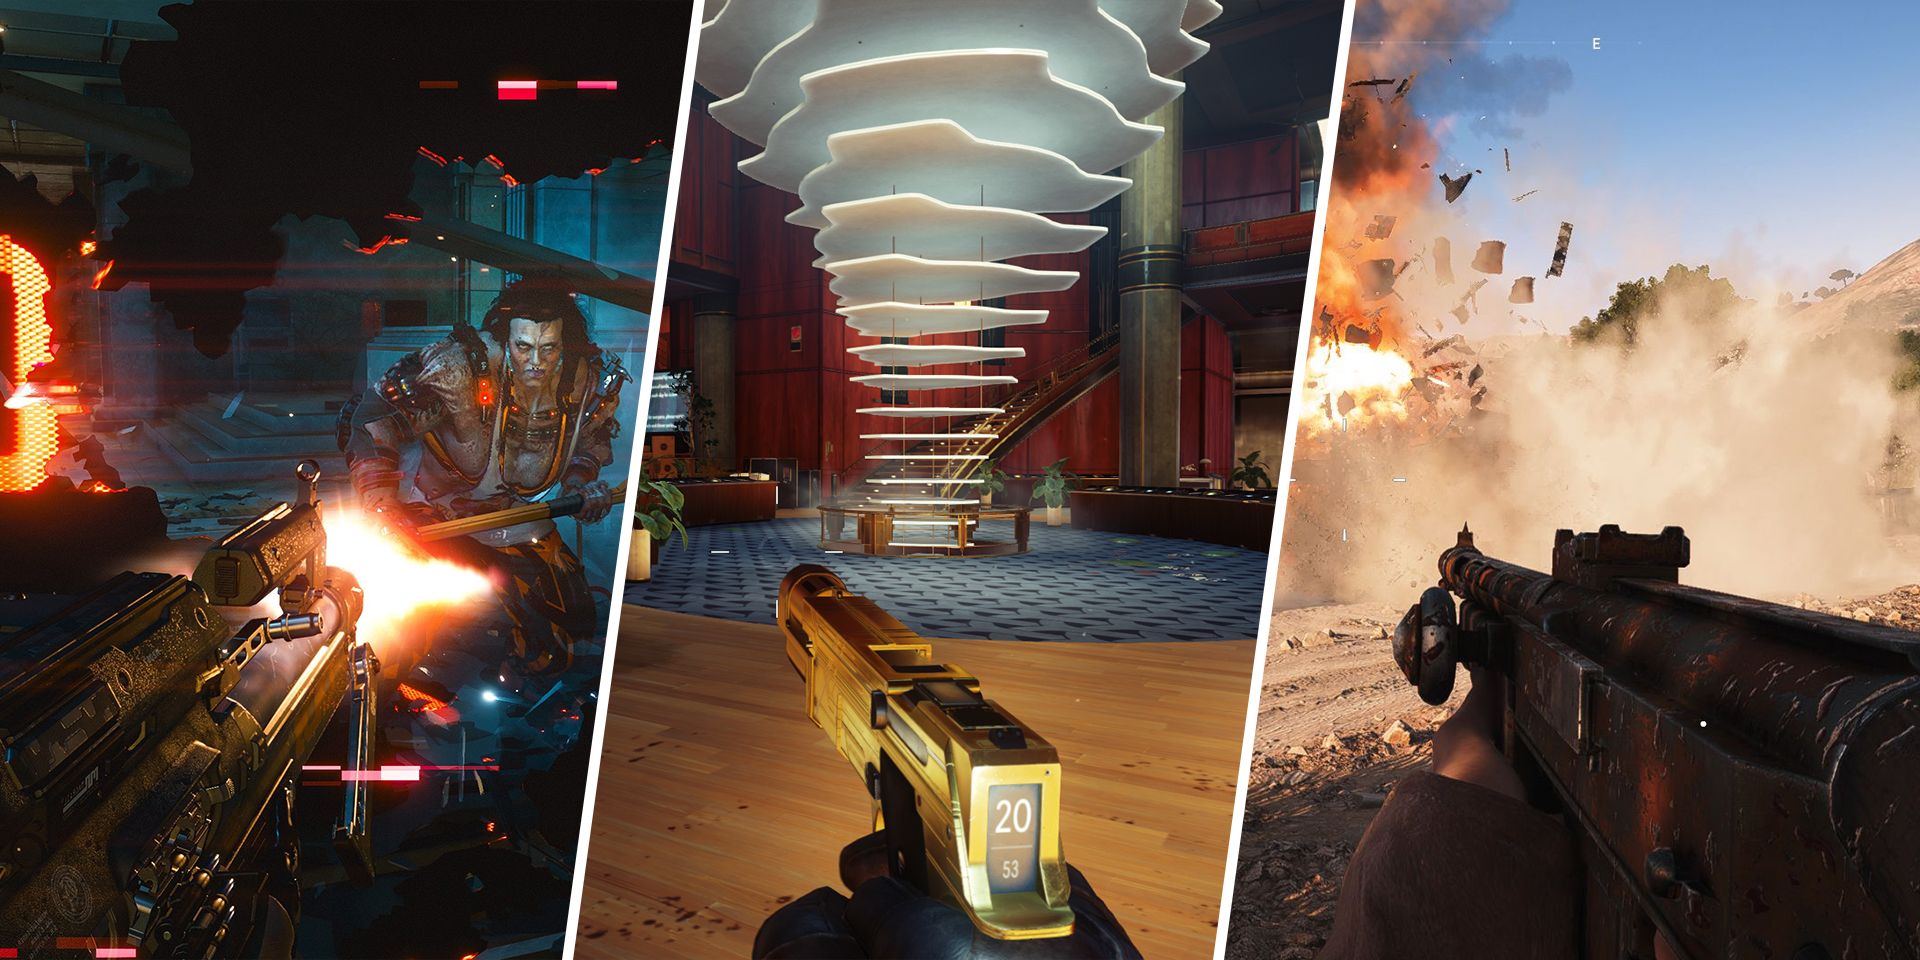 10 Shooter Games That Bombed At Launch But Became Cult Classics - Featured